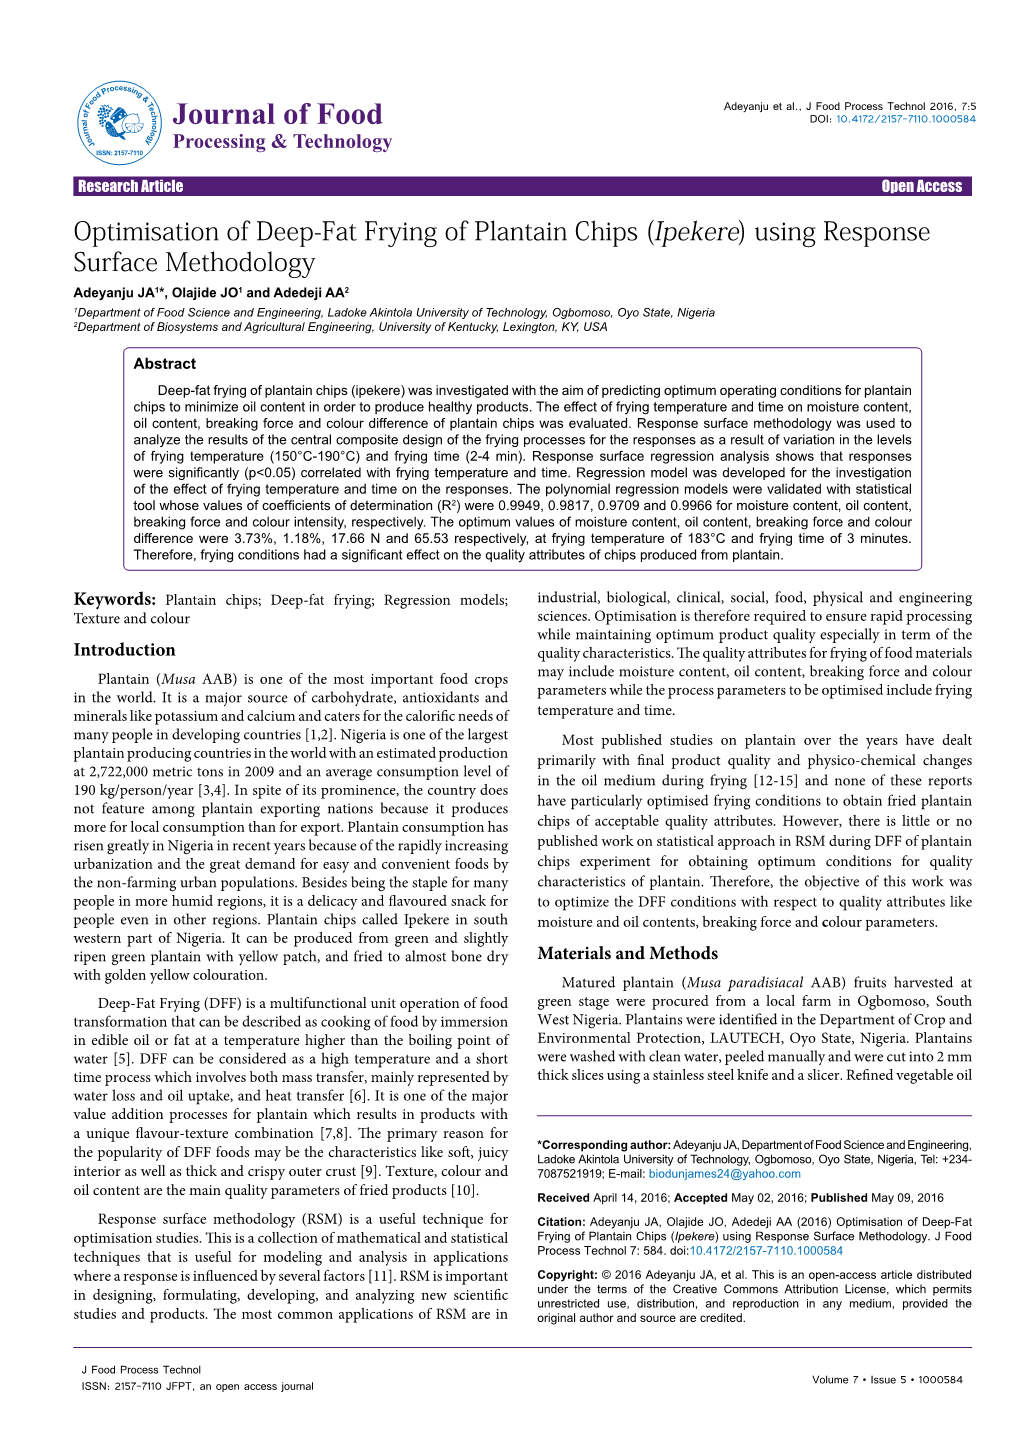 Optimisation of Deep-Fat Frying of Plantain Chips